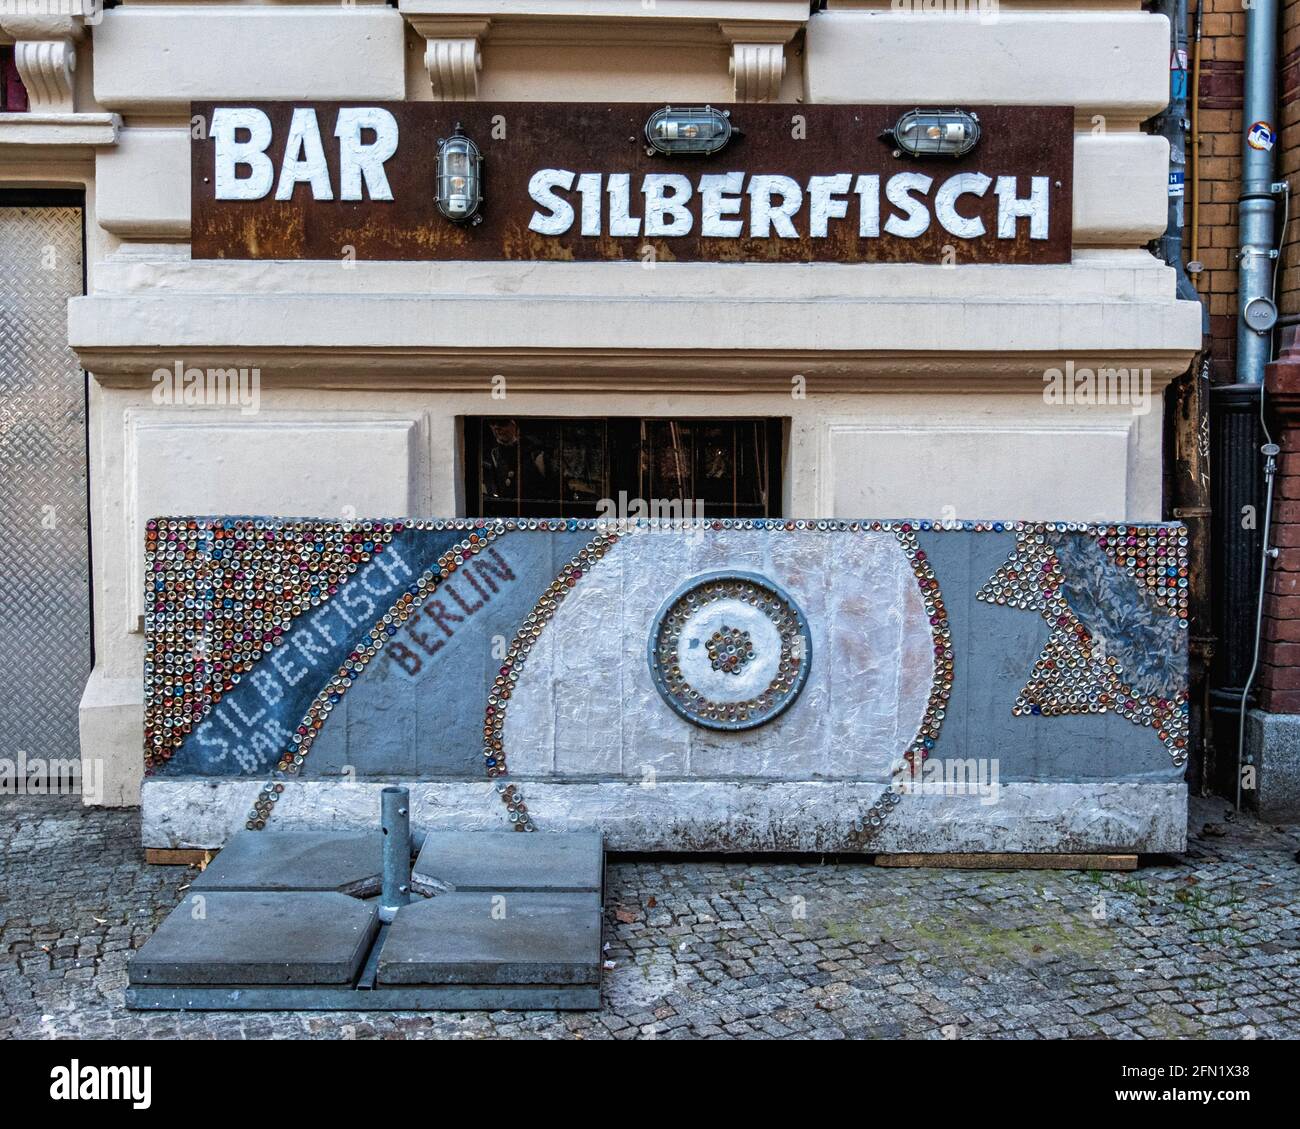 Berlin, Mitte. Bar Silberfisch closed during Covid pandmic, Classic traditional bar building exterior. and sign Stock Photo